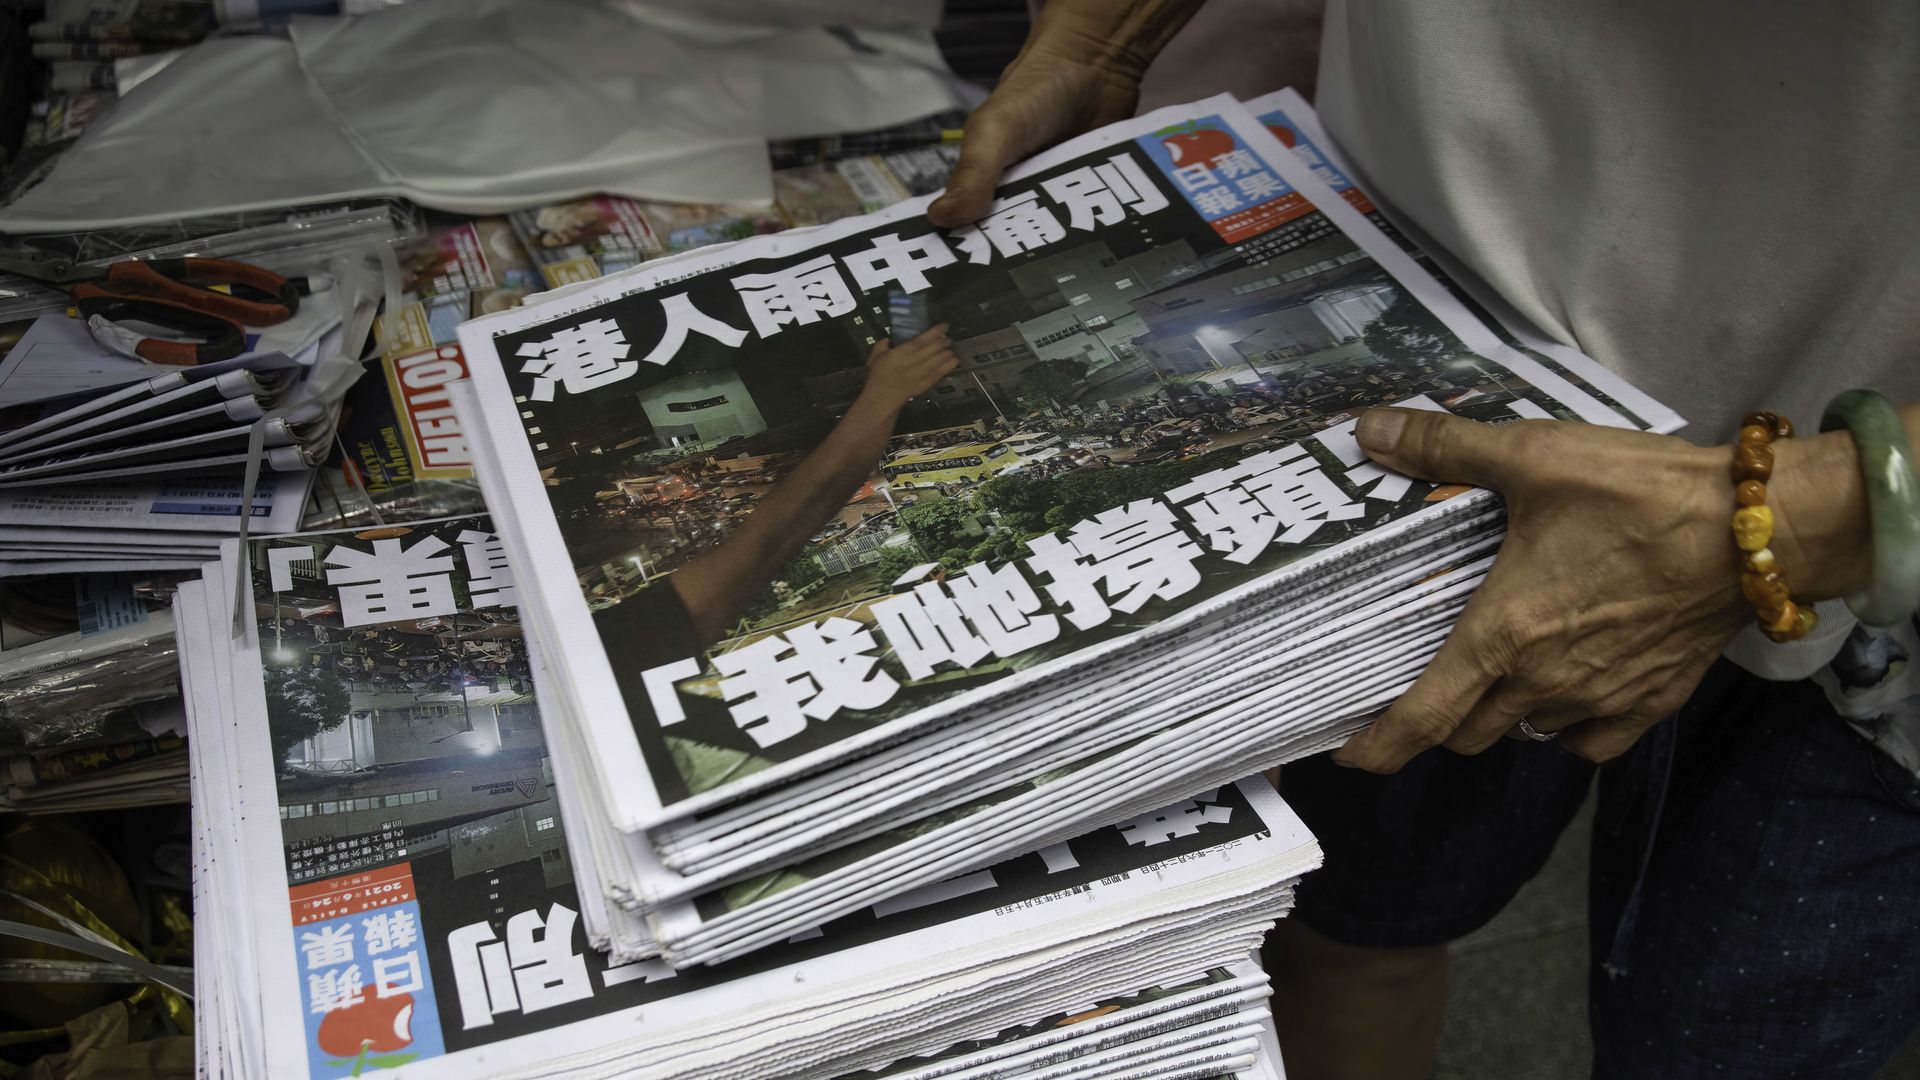 The front page of the final edition of Apple Daily newspaper at a newsstand in Hong Kong on June 24.